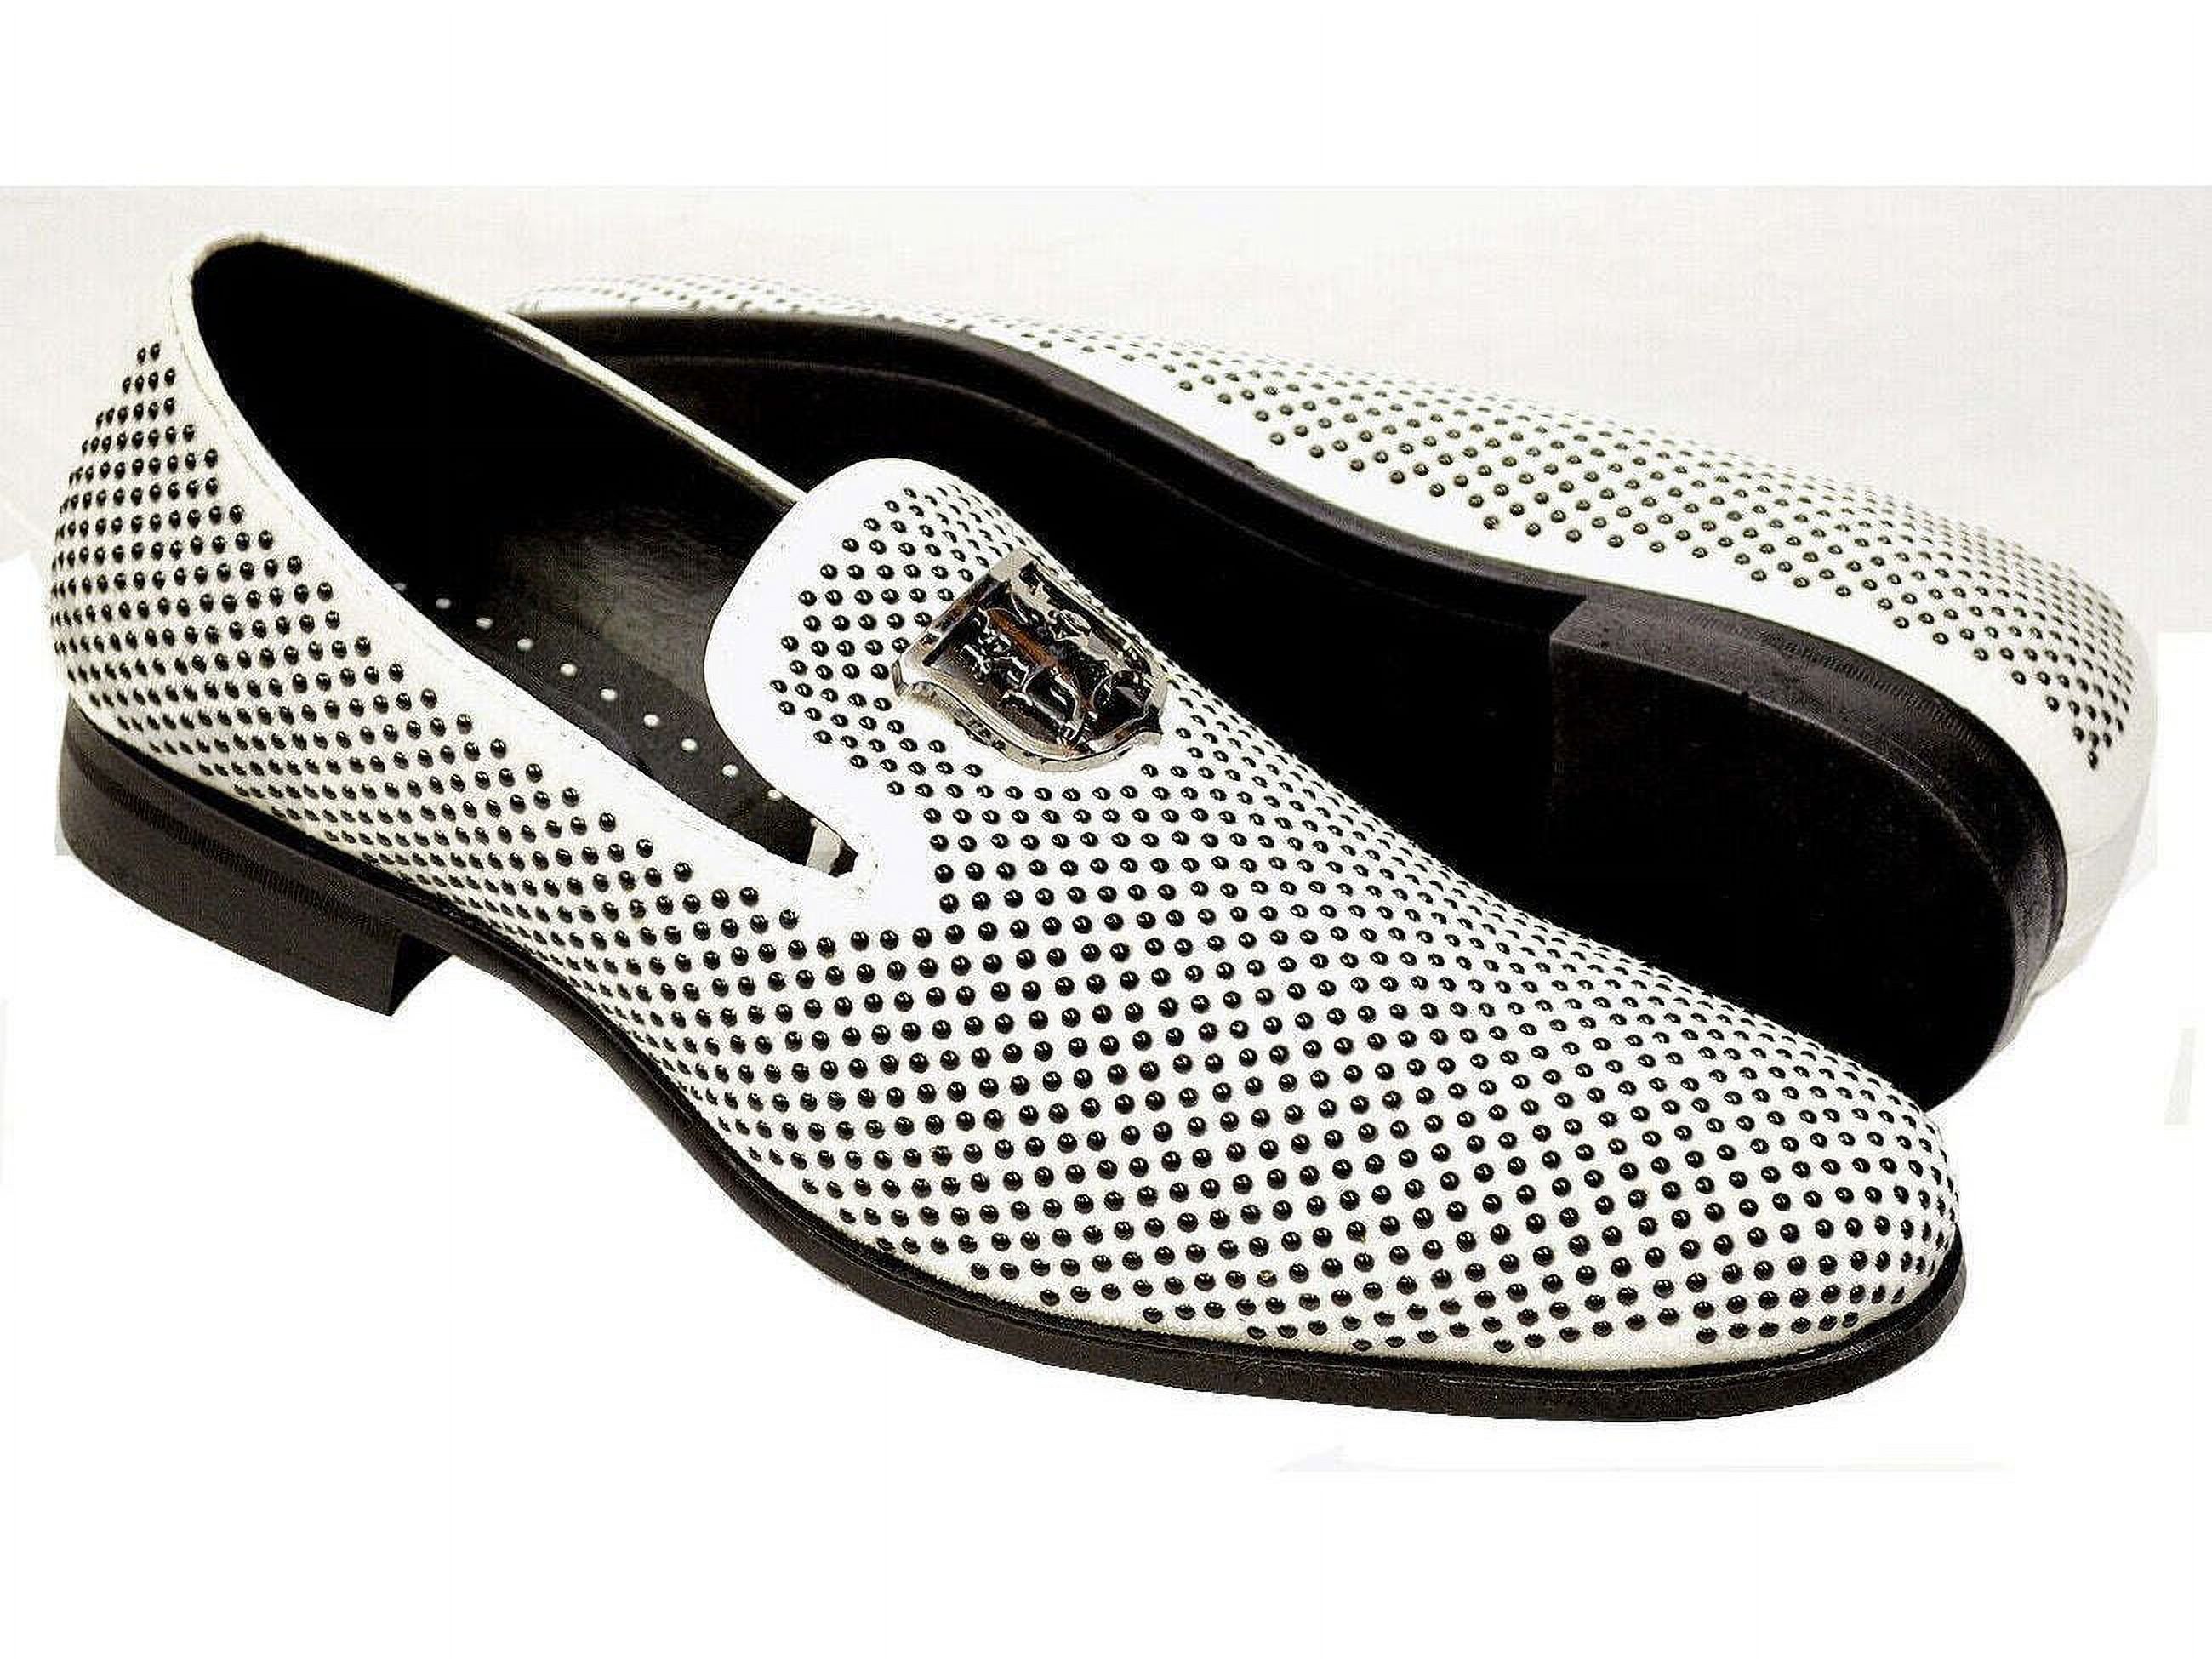 Stacy Adams Men Shoes Swagger Studded Slip On Satin Black White Formal 25228-111 - image 2 of 4